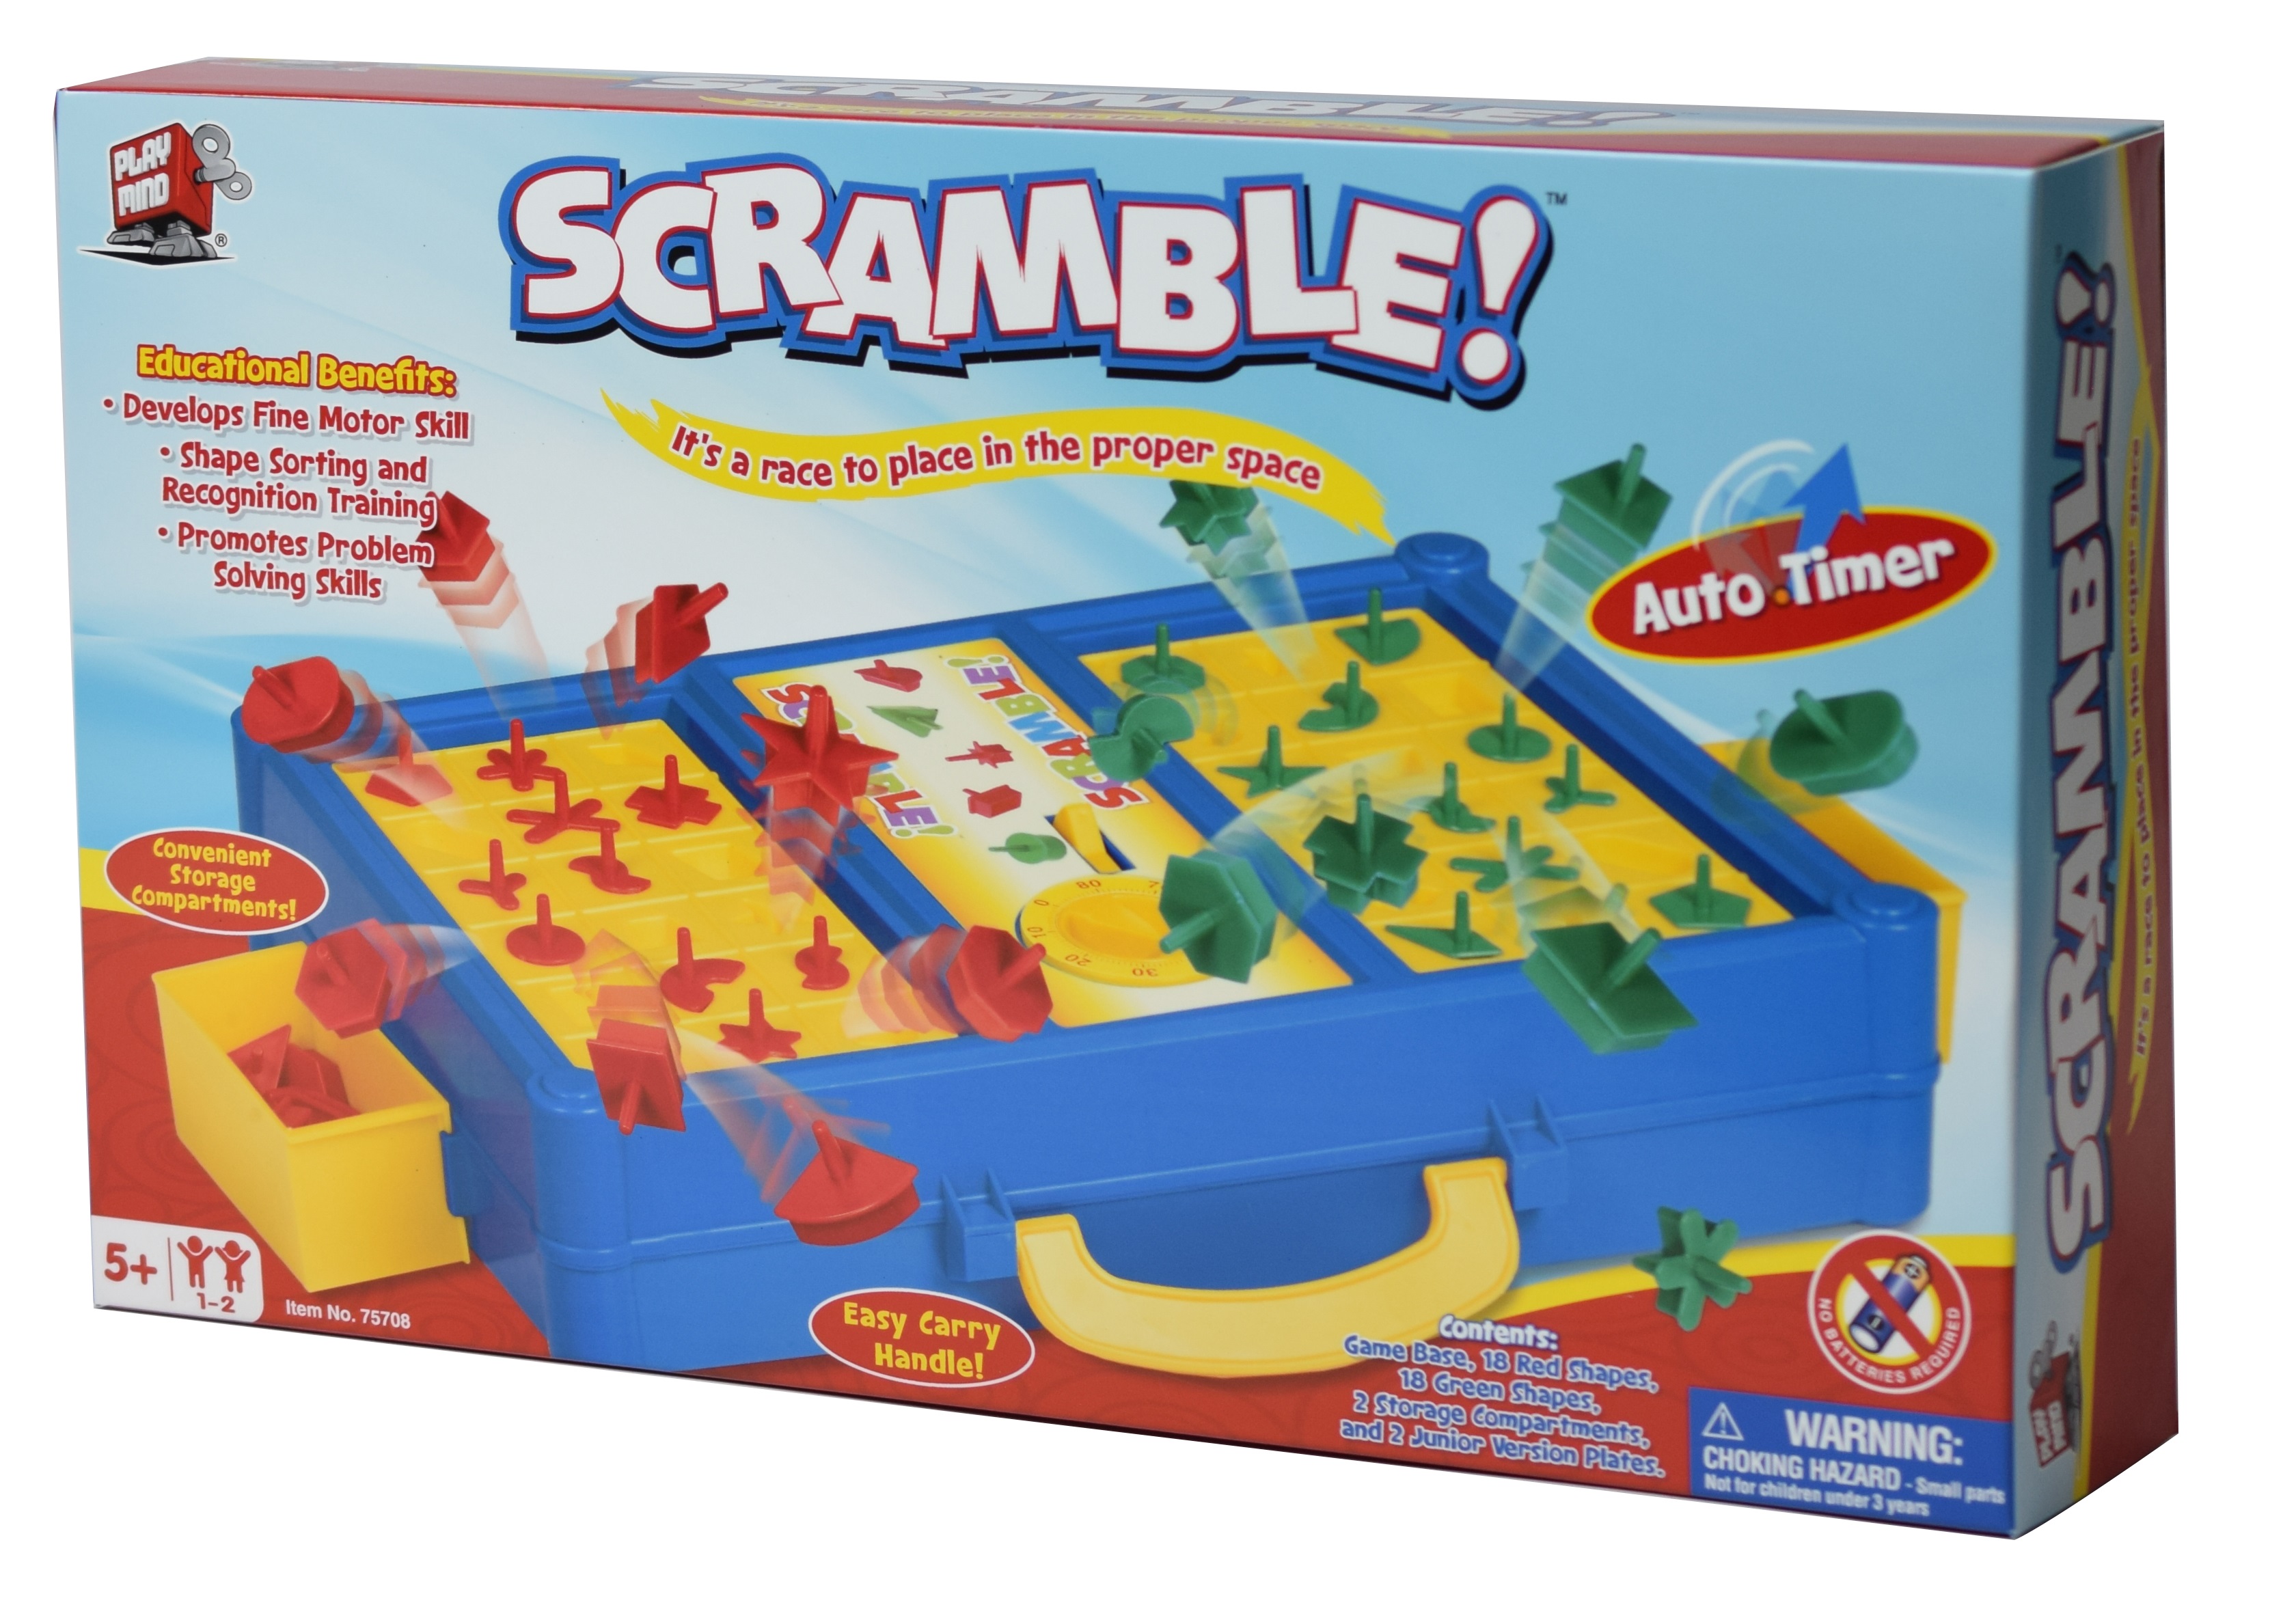  Scramble - Shape Matching Family Board Game! Sorting Shapes  Fast Before The Time is Up & Pieces Pop Out! Play Solo/with Friends.  12-Shape Junior Version Plates Included! : Toys & Games